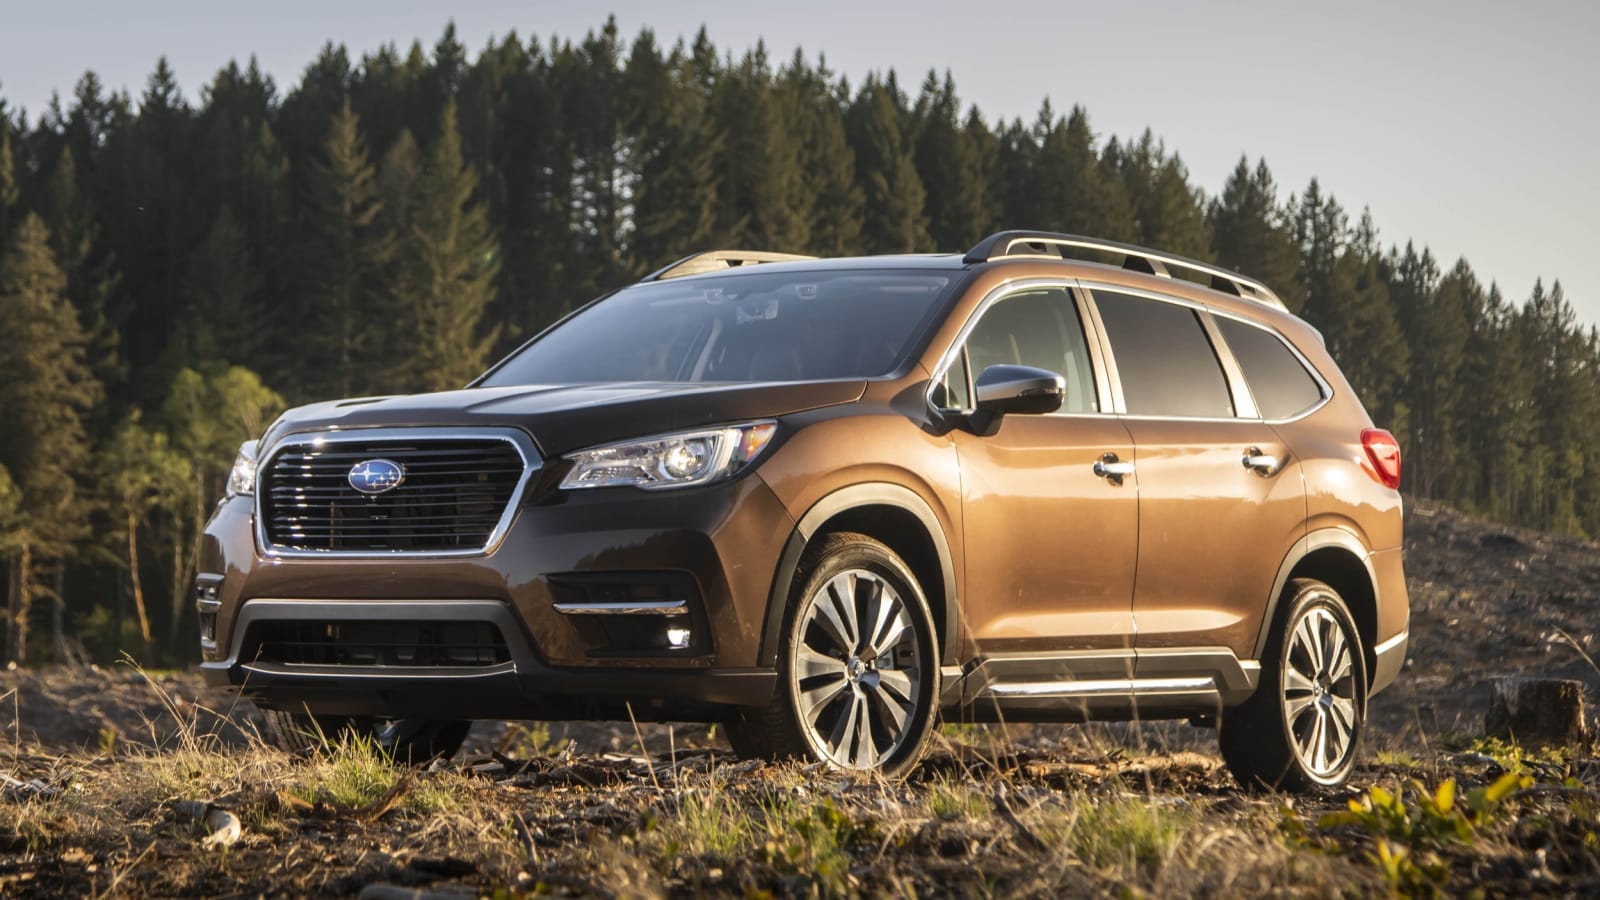 2021 Subaru Ascent Review | Price, specs, features and photos